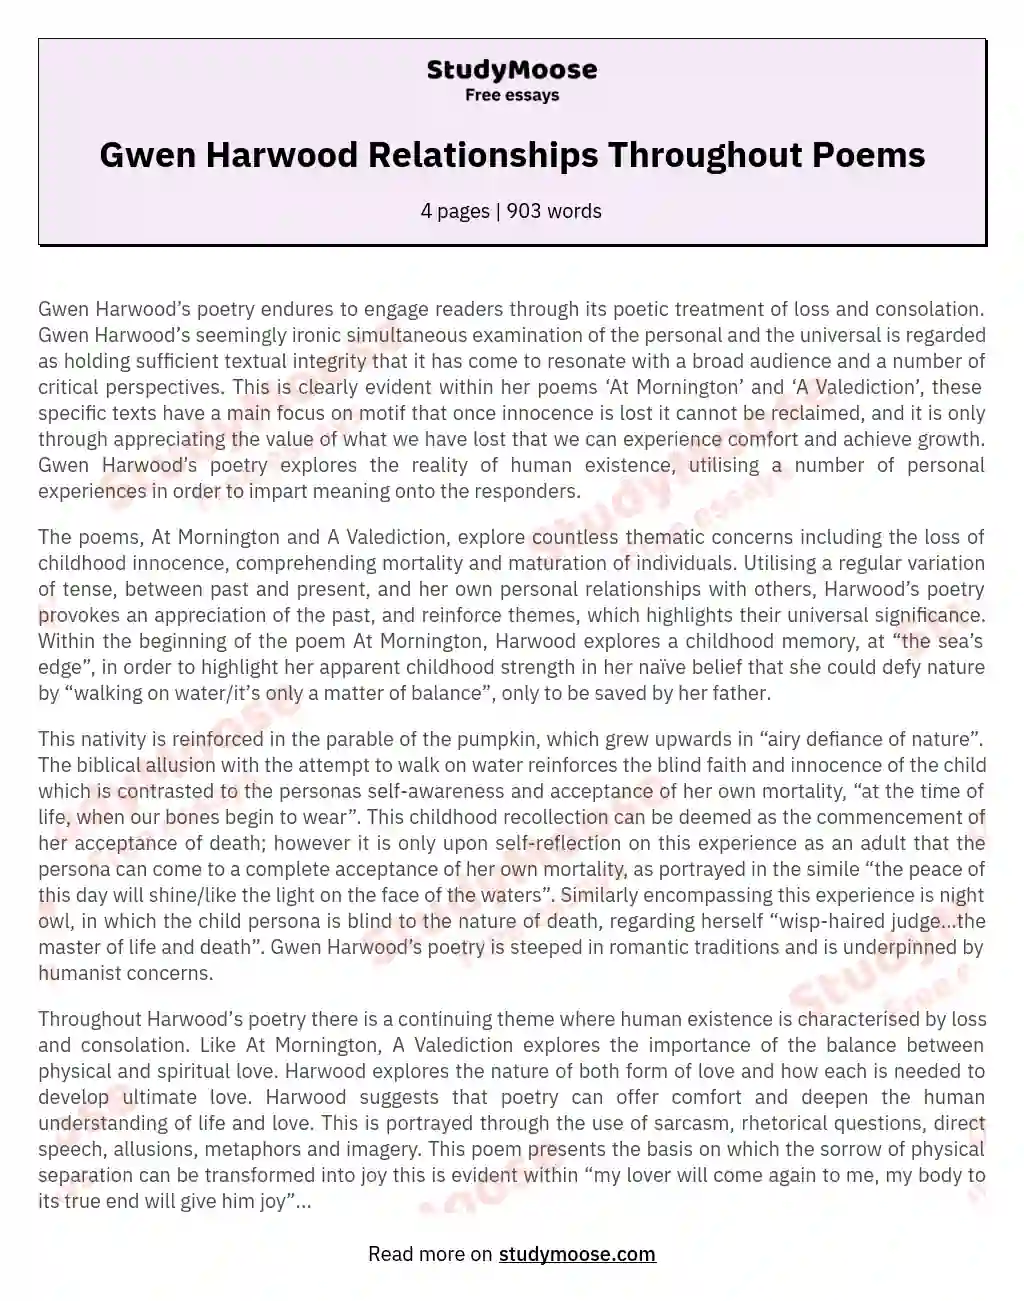 Gwen Harwood Relationships Throughout Poems essay